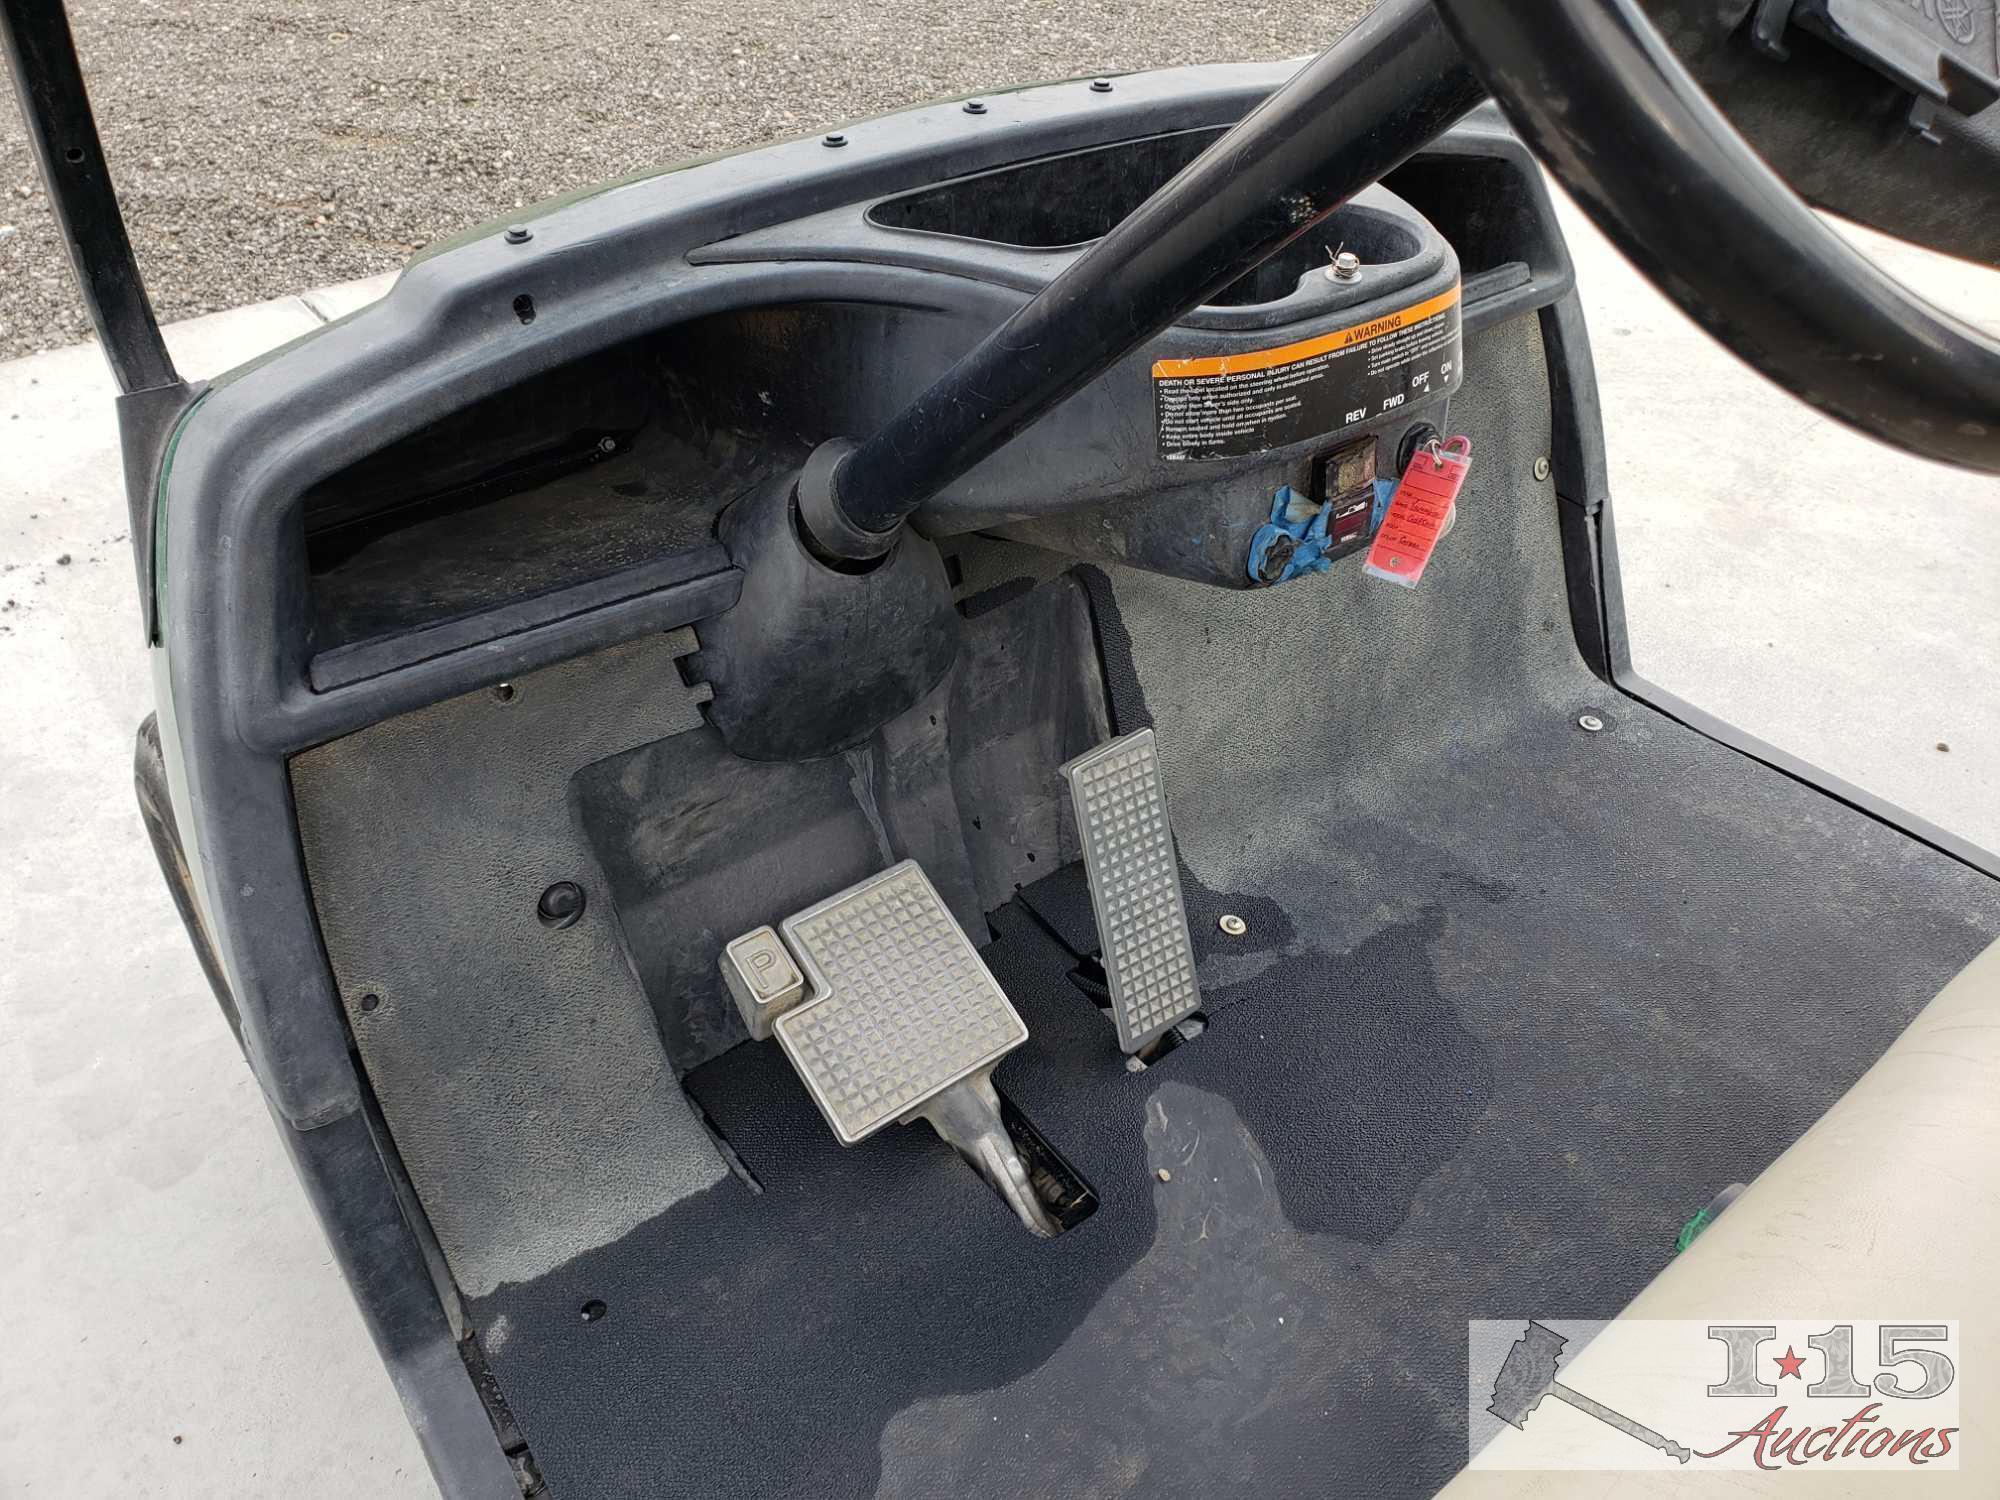 Yamaha 48 Volt Electric Golf Cart with Dump Bed, Running See Video!